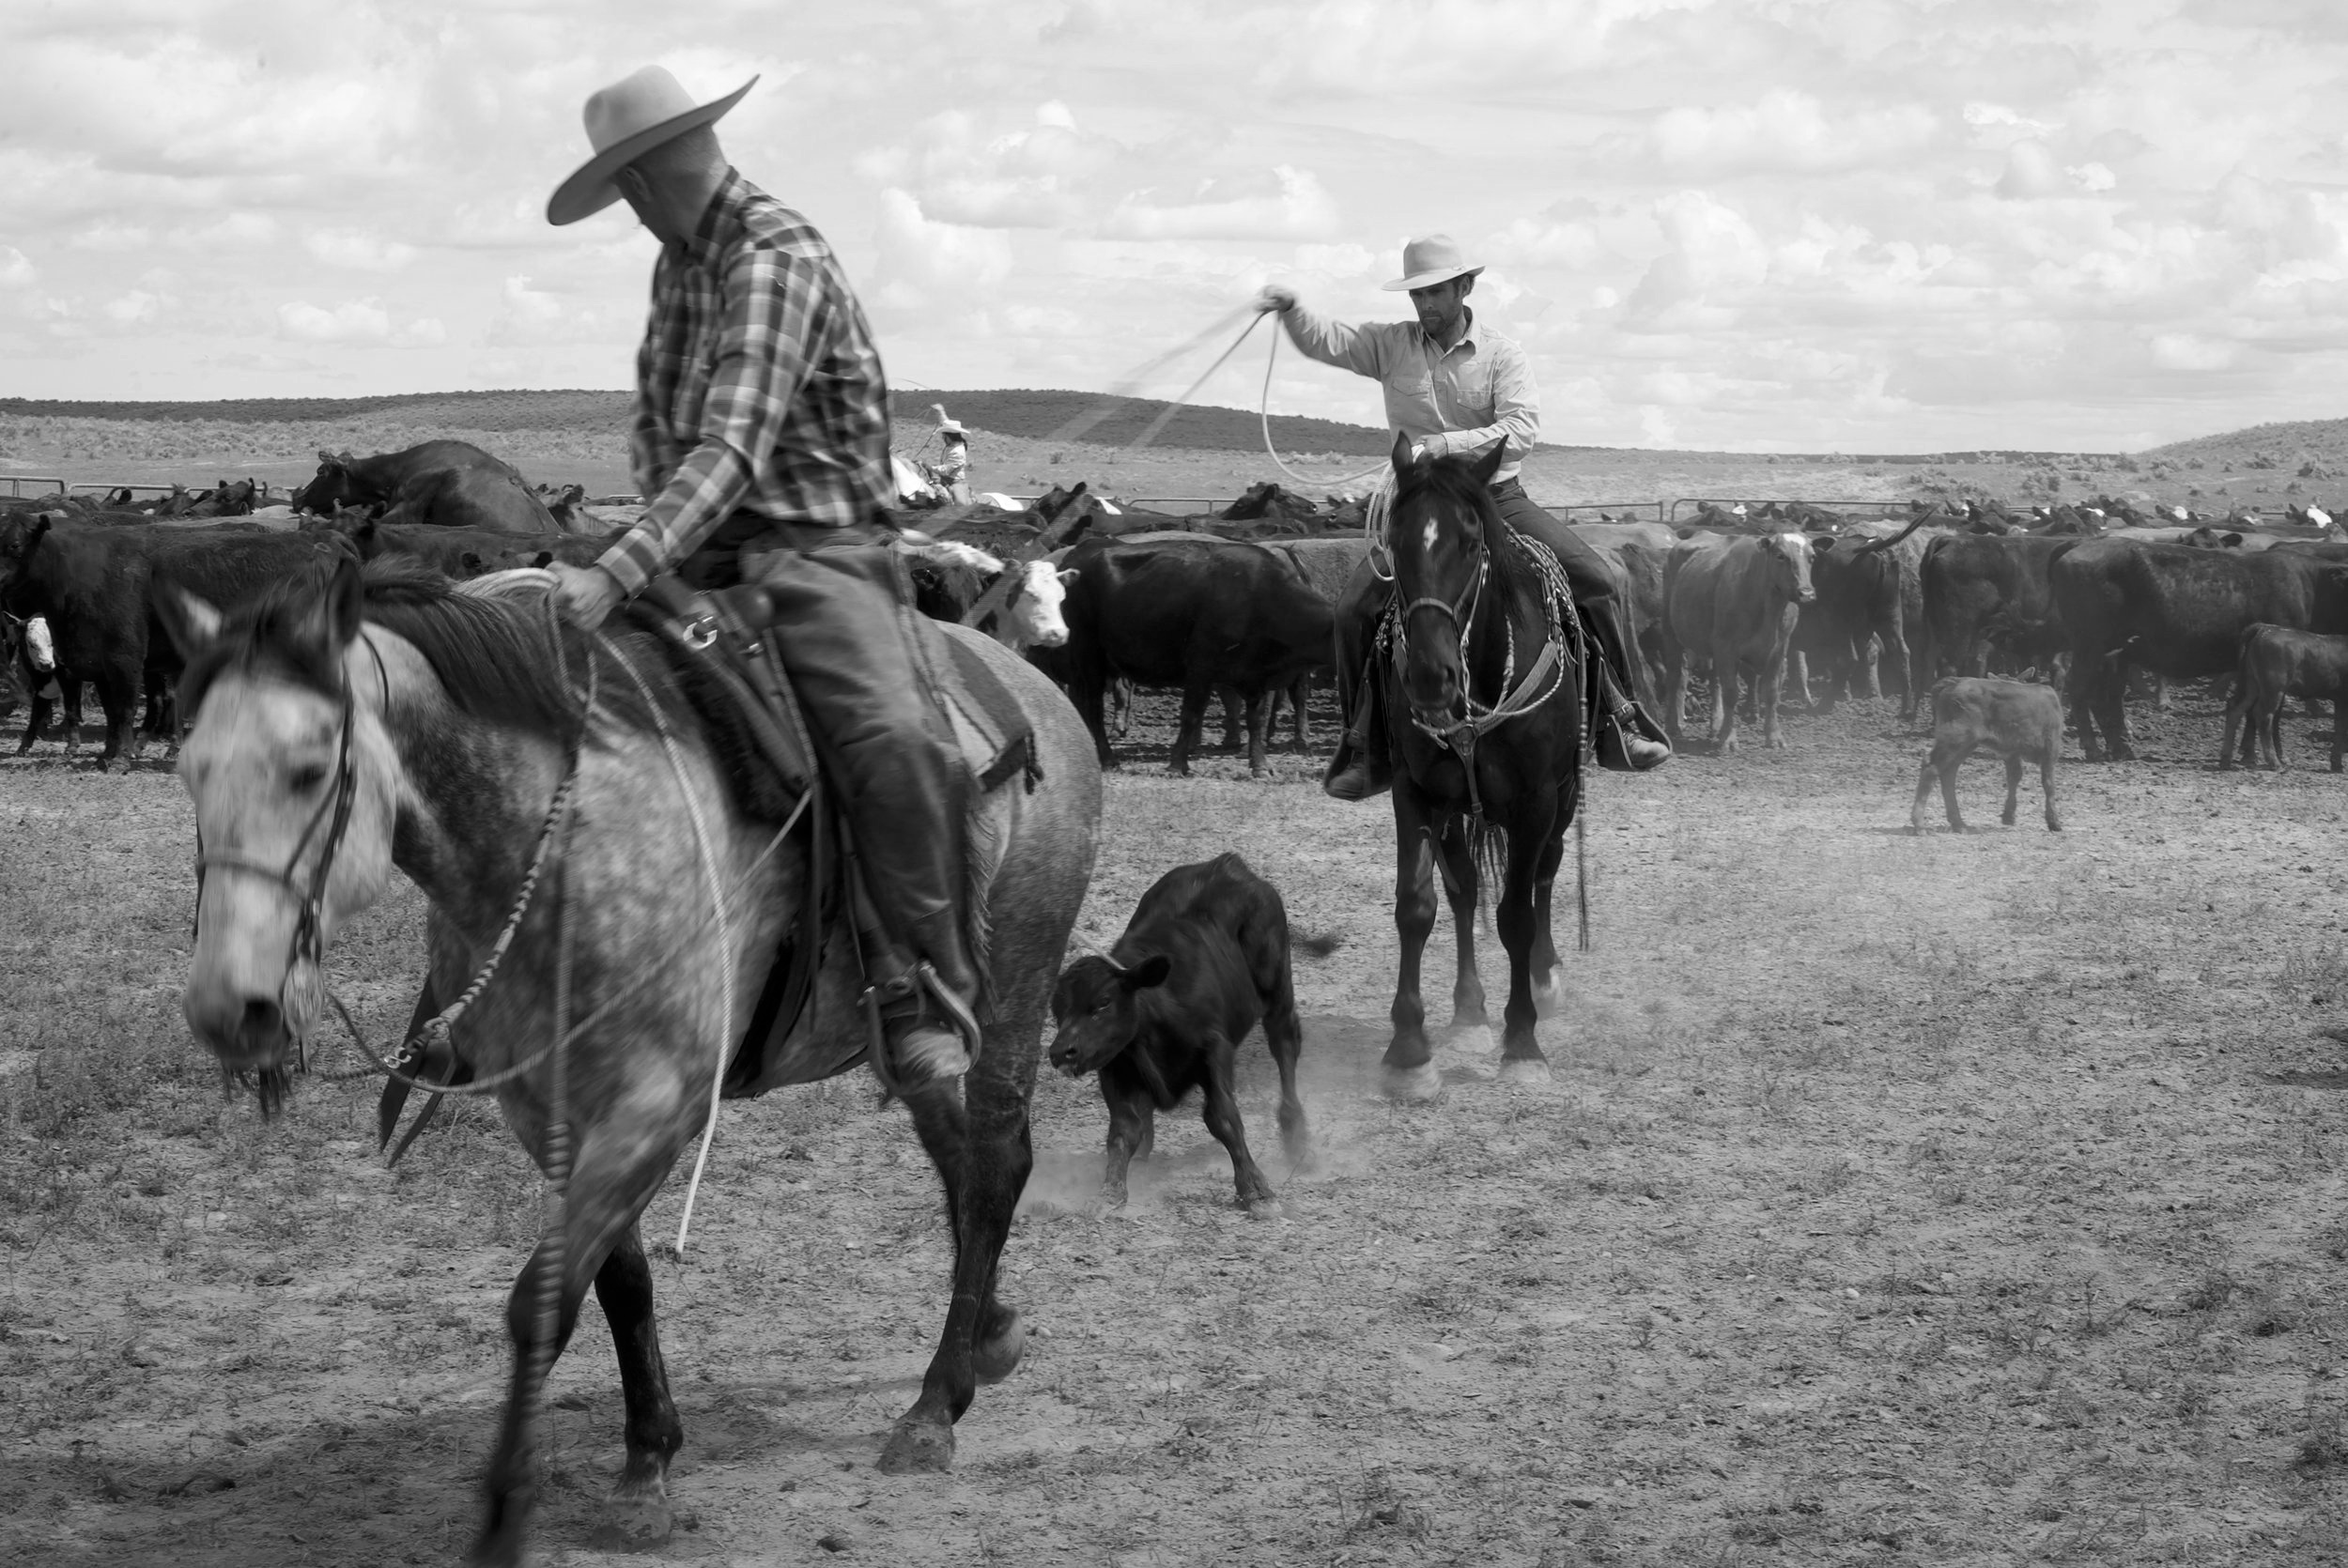  Roping calves with the cowboys of the YP Ranch in Tuscarora, Nevada, while filming “Cowboys: A Documentary Portrait” Photo: Hank Wisrodt 